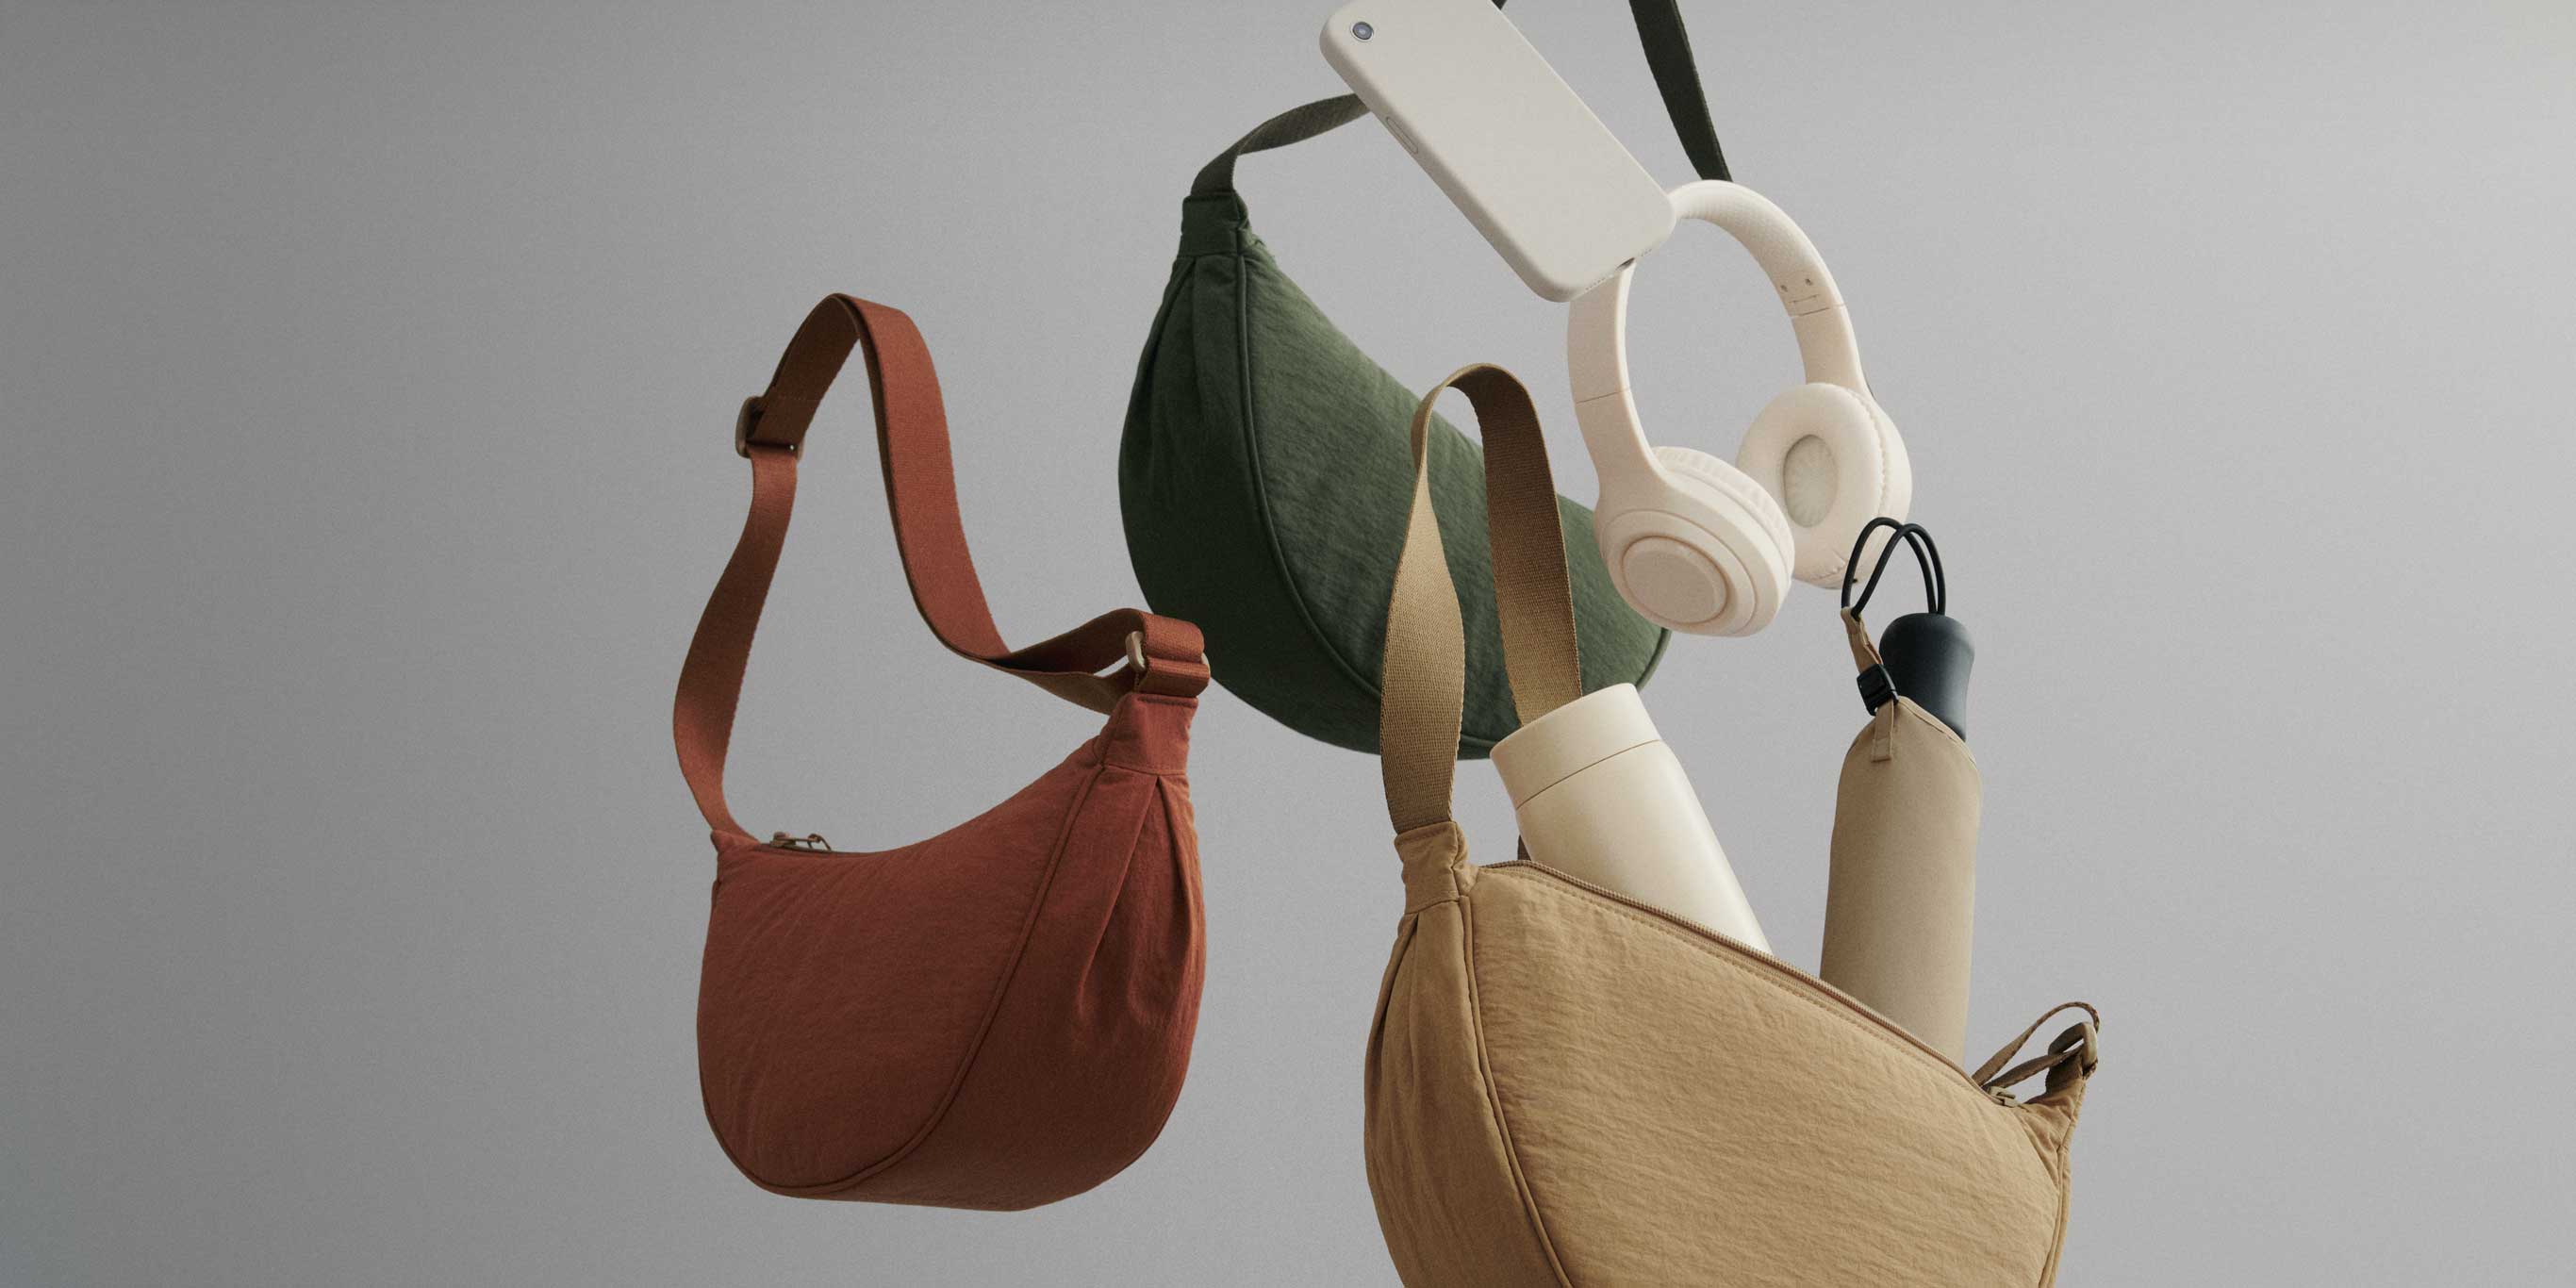 Our best-selling bag, now in new colors.